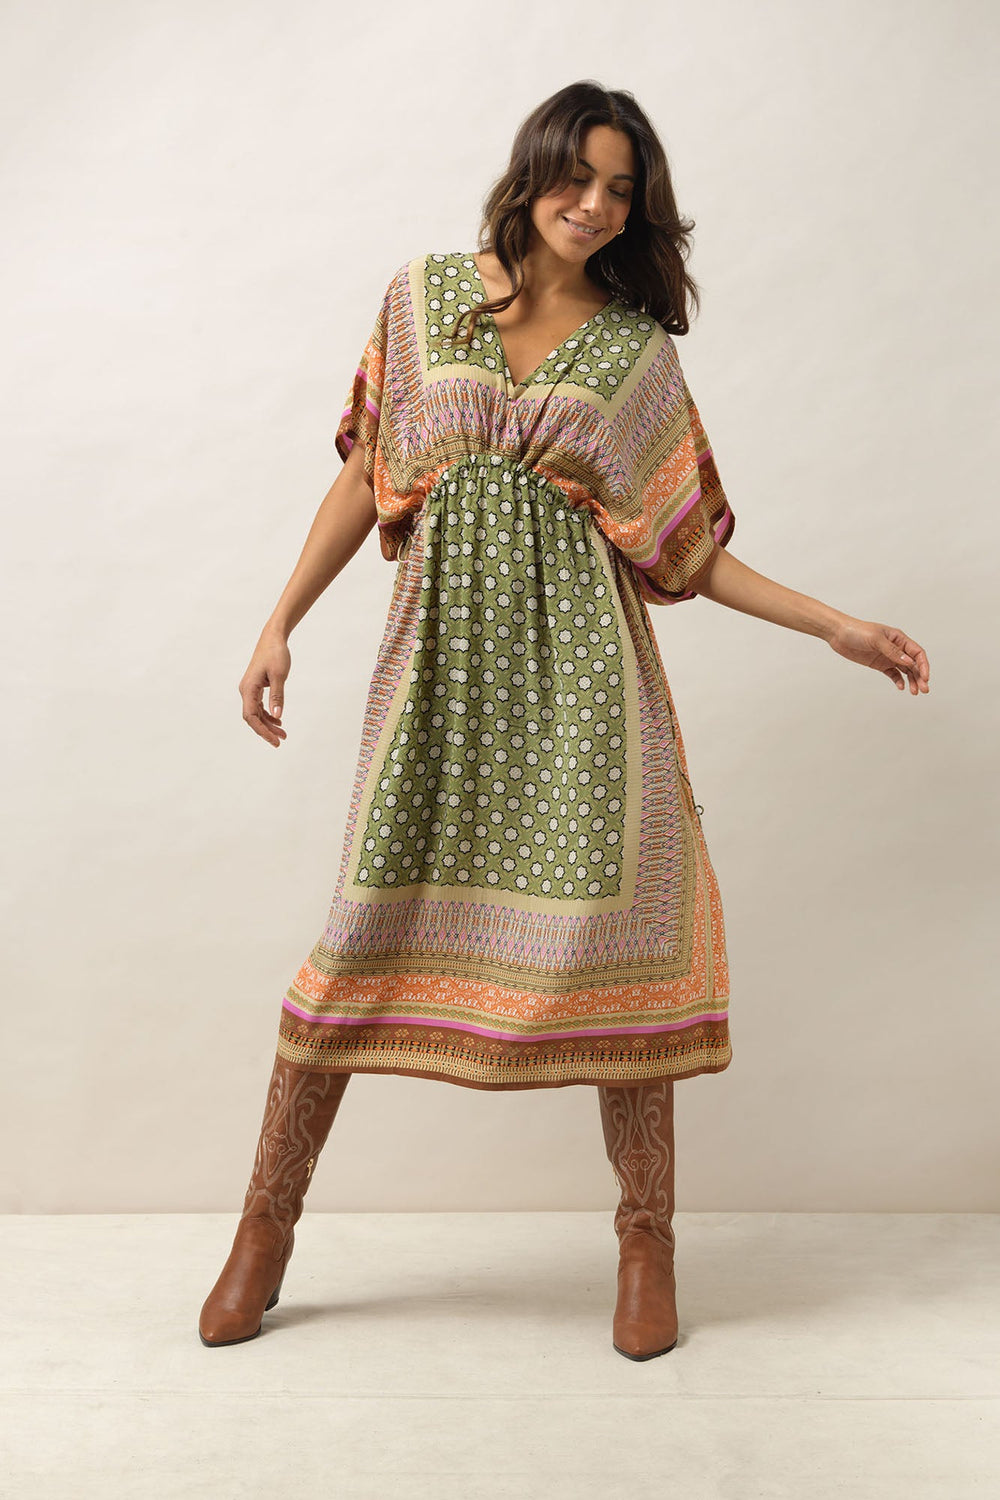 Women's lightweight beach cover up dress with tie waist in green with Moorish print by One Hundred Stars